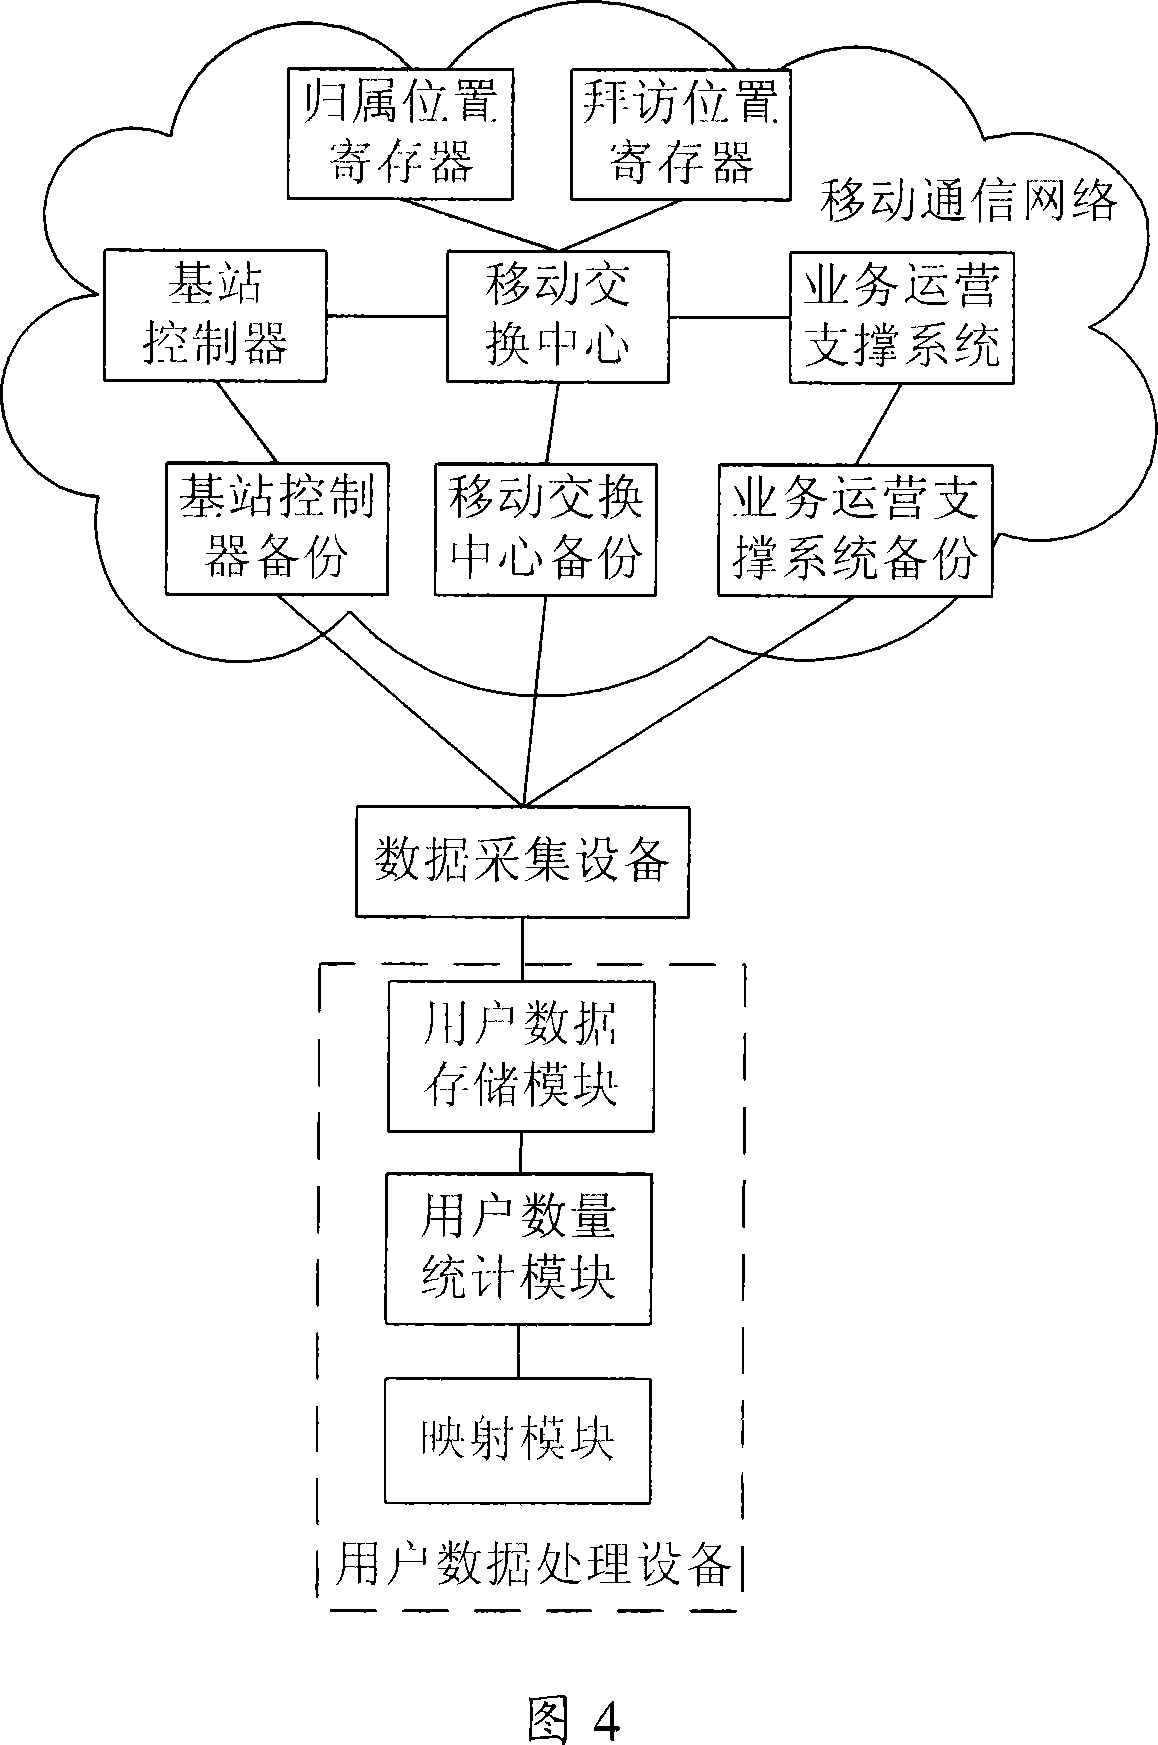 Method and system for obtaining people information